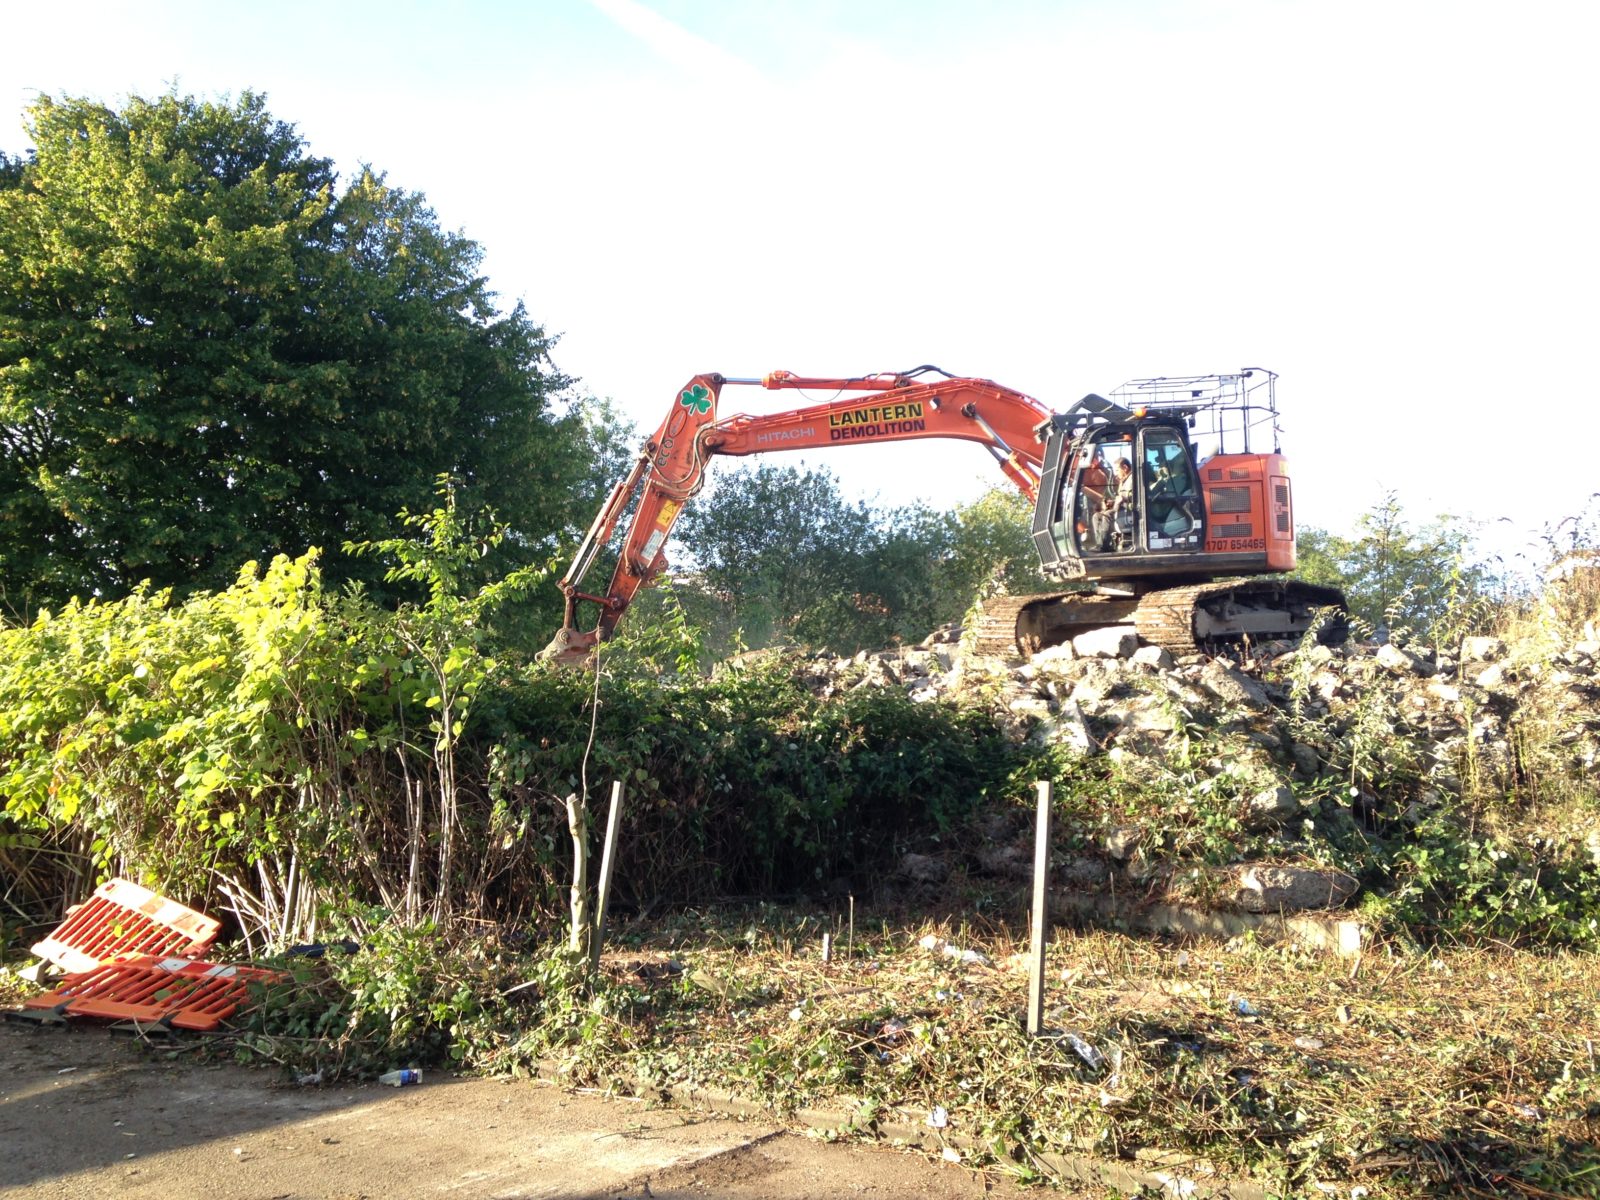 Dig and Dump knotweed removal services